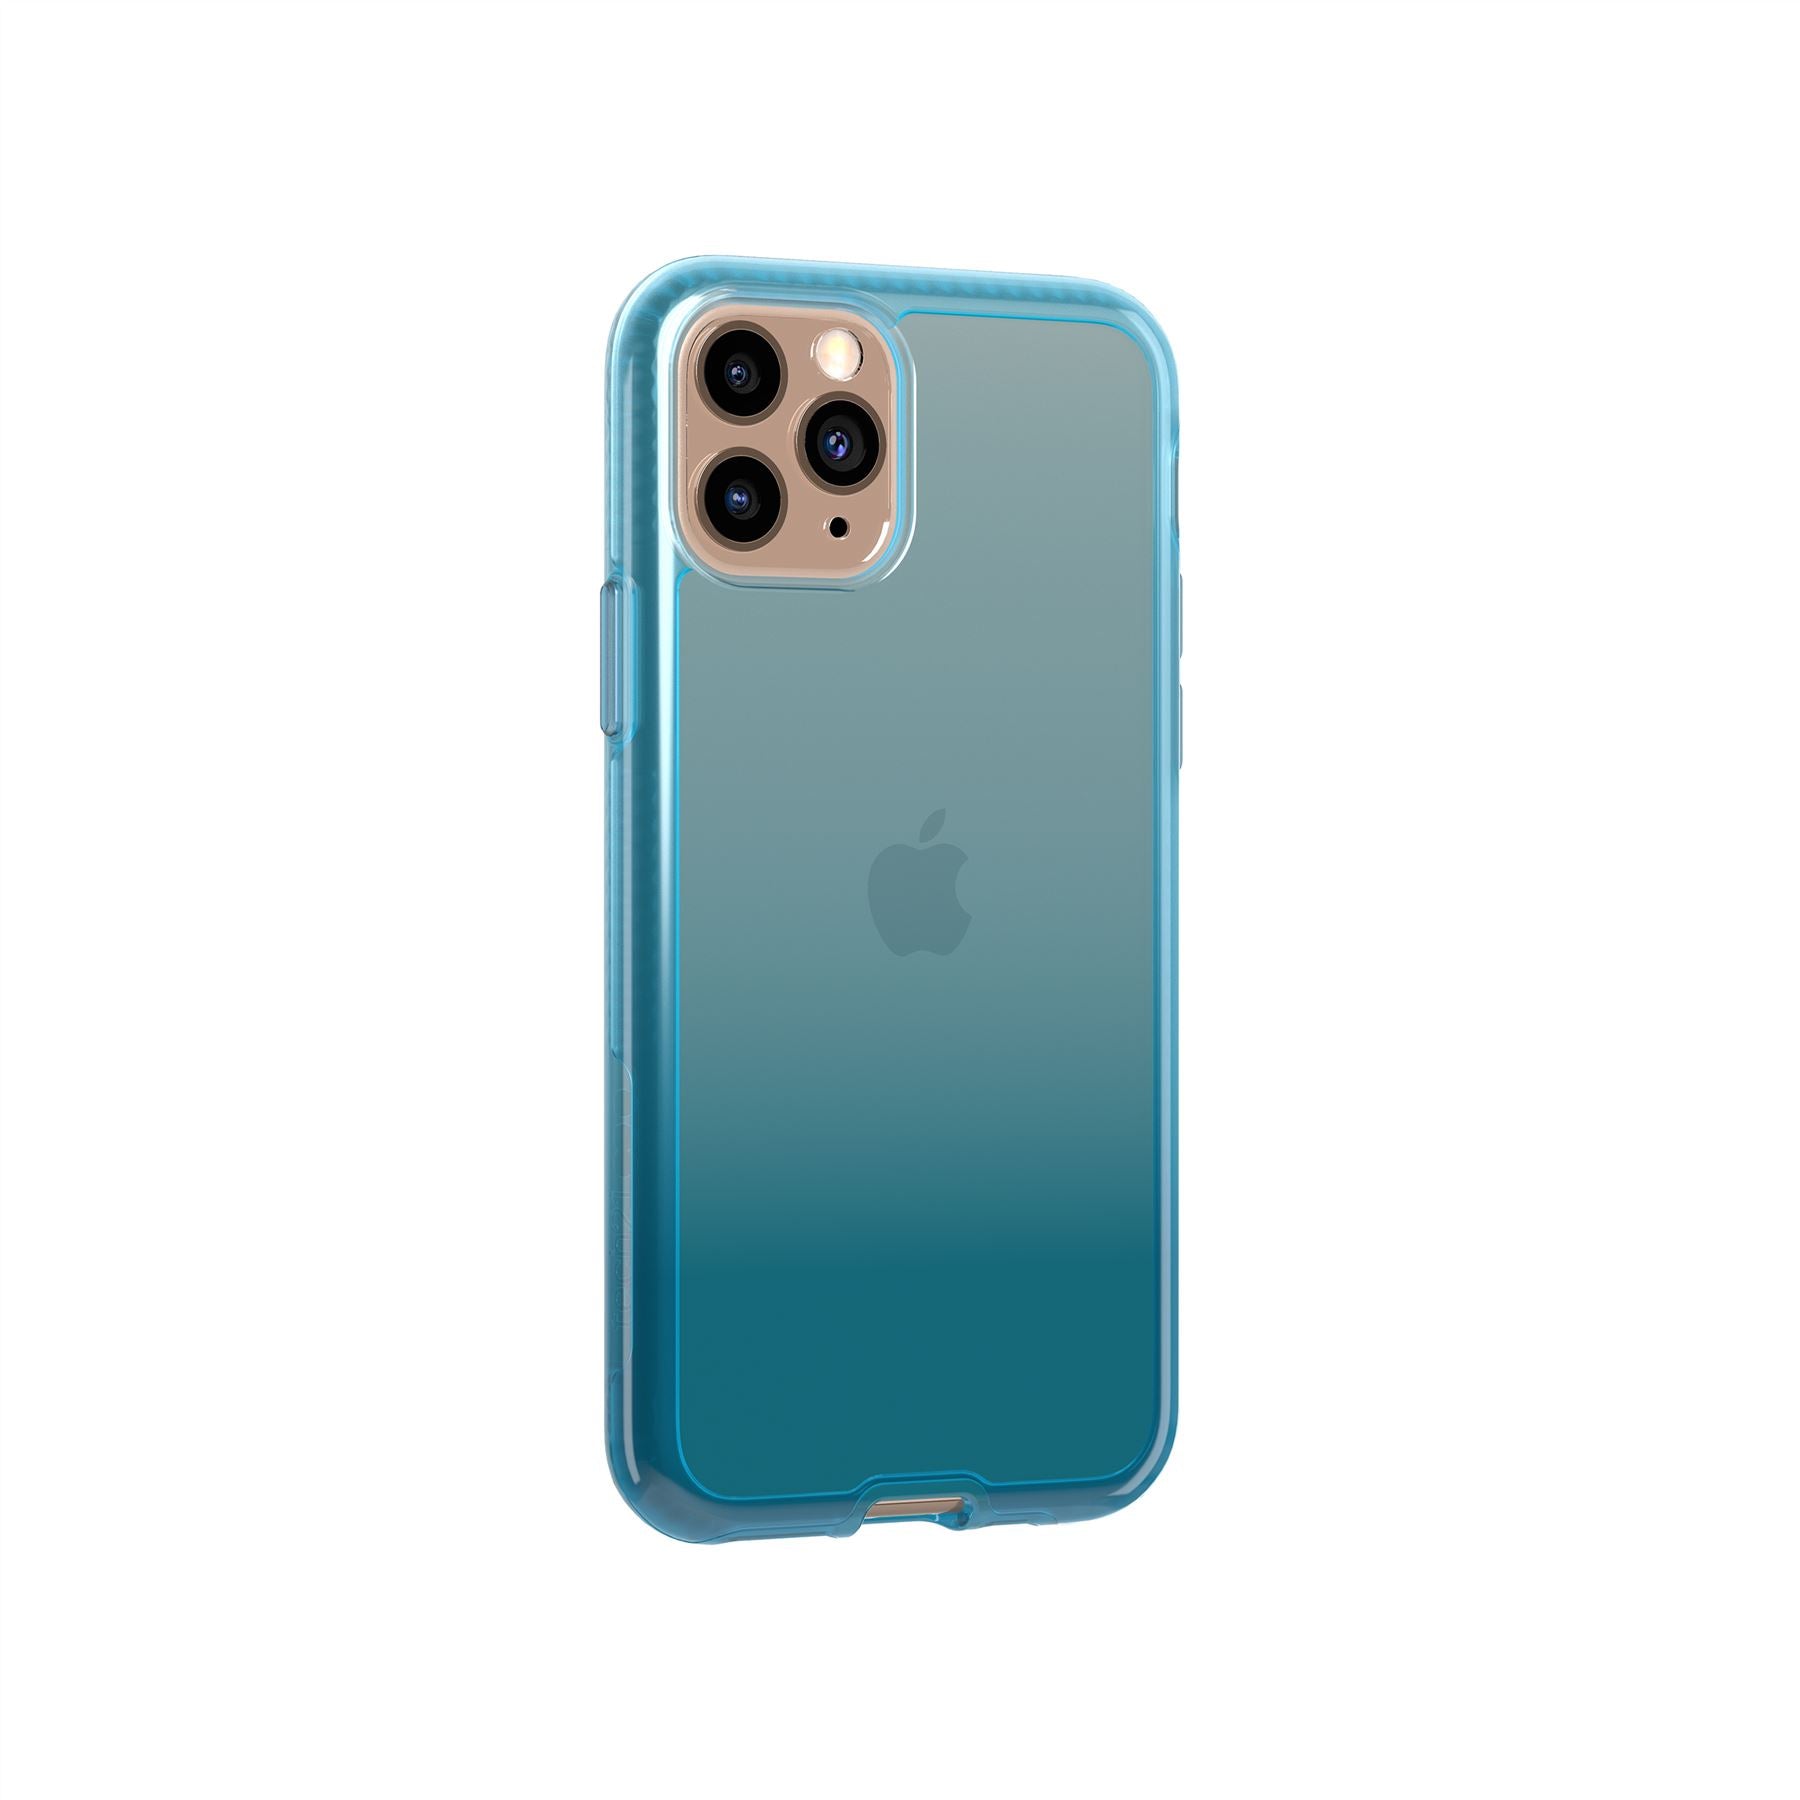 Tech21 Remix in Motion Case for iPhone 11 - Slate